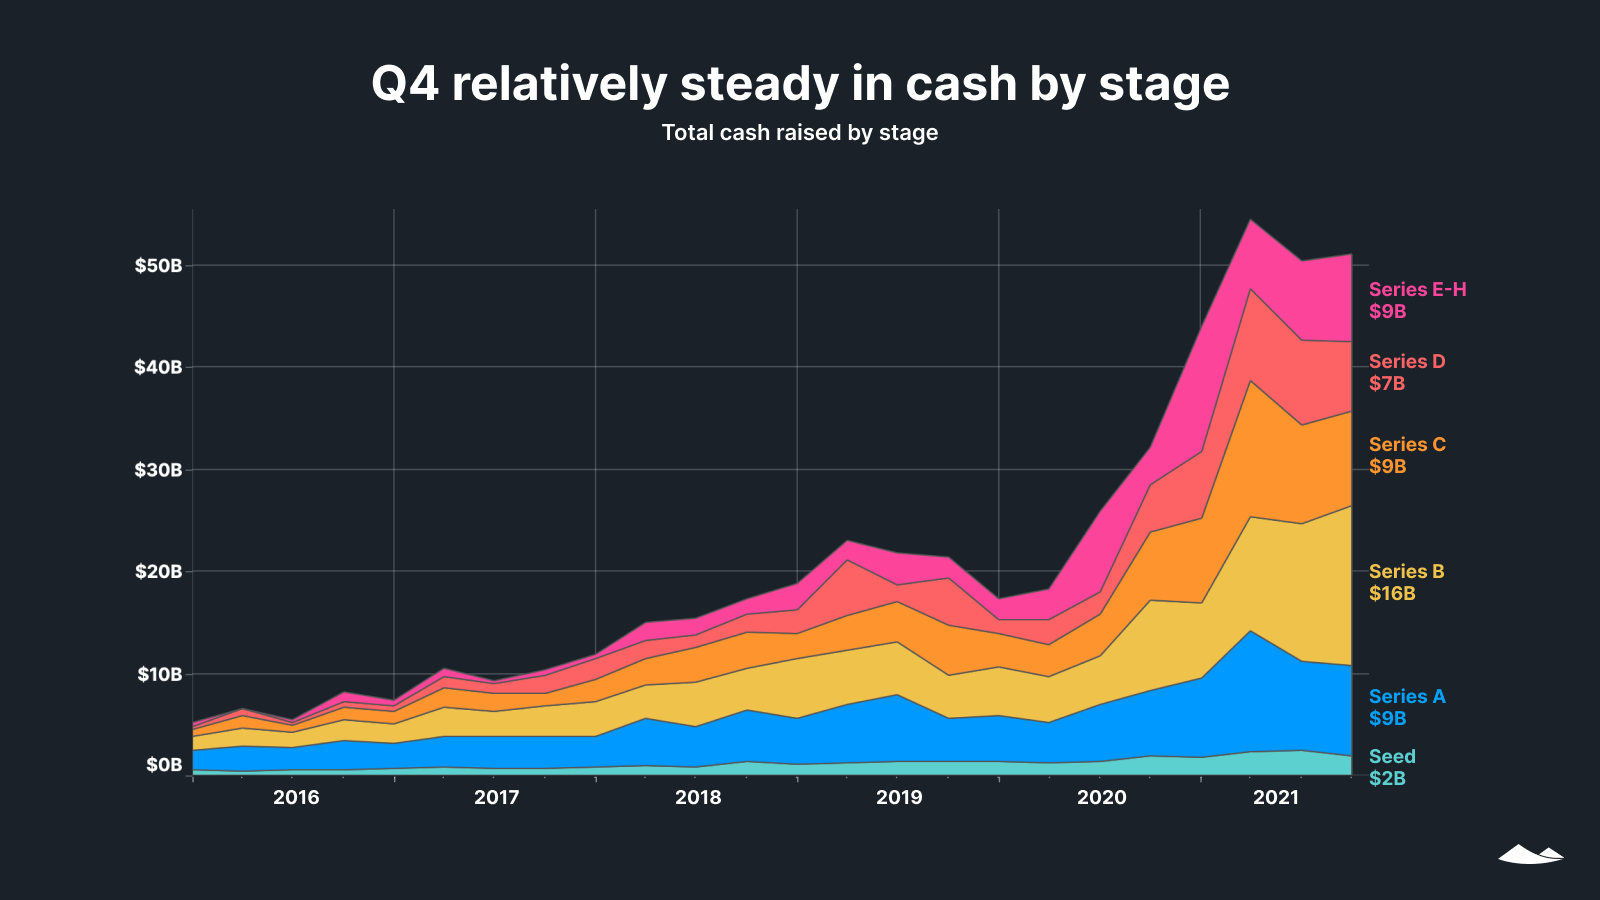 Q4 relatively steady in cash by stage